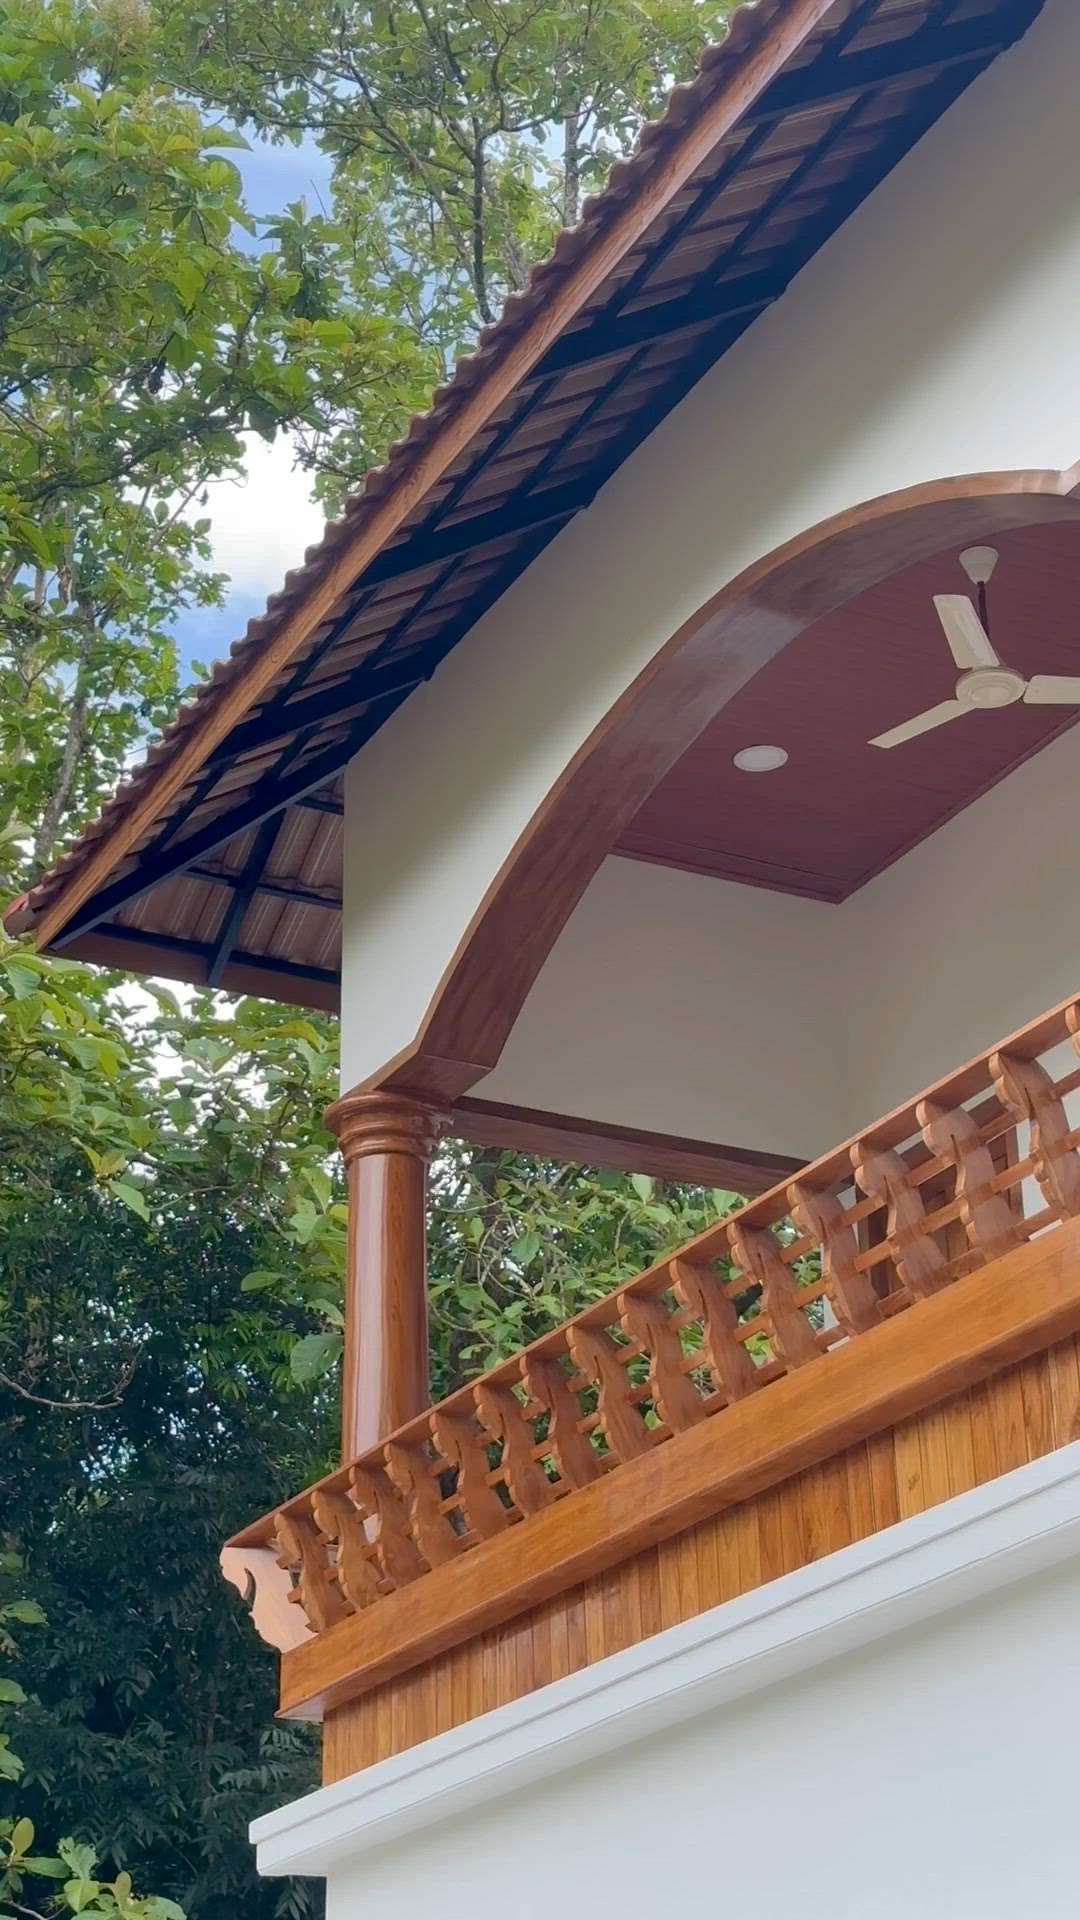 Step into the splendour of a traditional style house 
.
.
.
One of our ongoing project at  Alappuzha

For more details please contact 9539999885
#wearchdevelopers #architexture #interior #traditional #reelsinstagram #music #art #style #homelove #moderndecor #projecto #homestyledecor